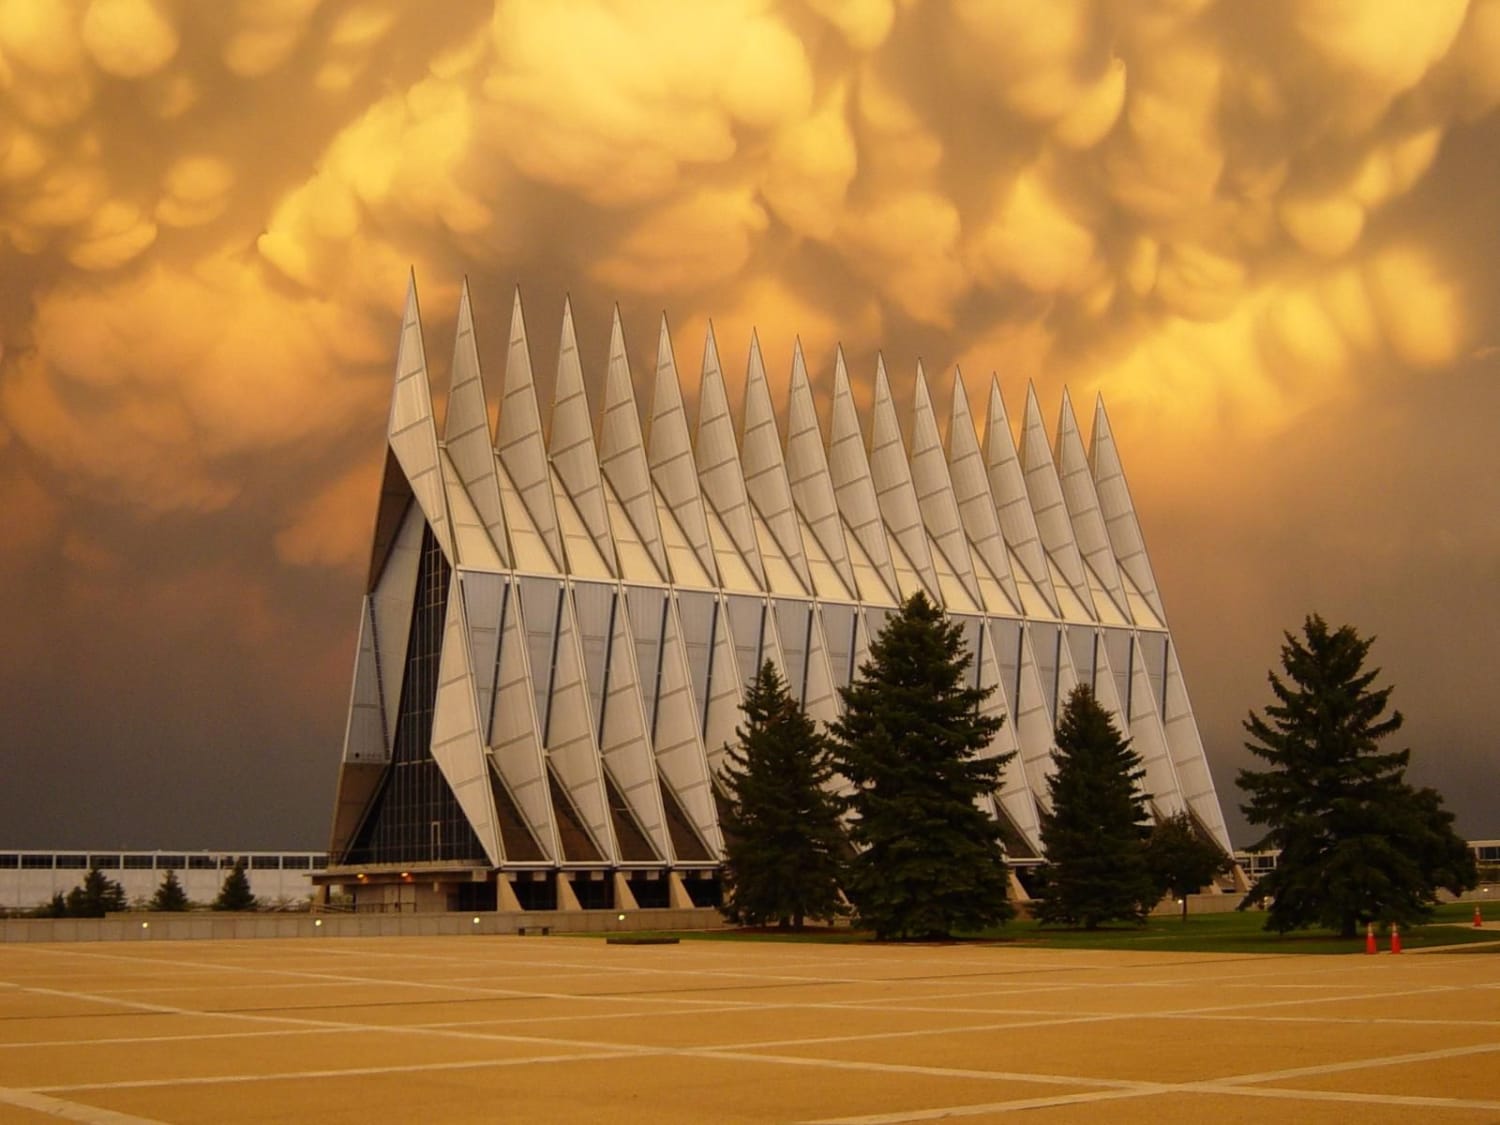 United States Air Force Academy Cadet Chapel - Colorado Springs, Colorado - 1962 - Designed by Walter Netsch of Skidmore, Owings and Merrill - A highly regarded example of modernist architecture - American Institute of Architects' National 25 Year Award 1996 - U.S. National Historic Landmark in 2004